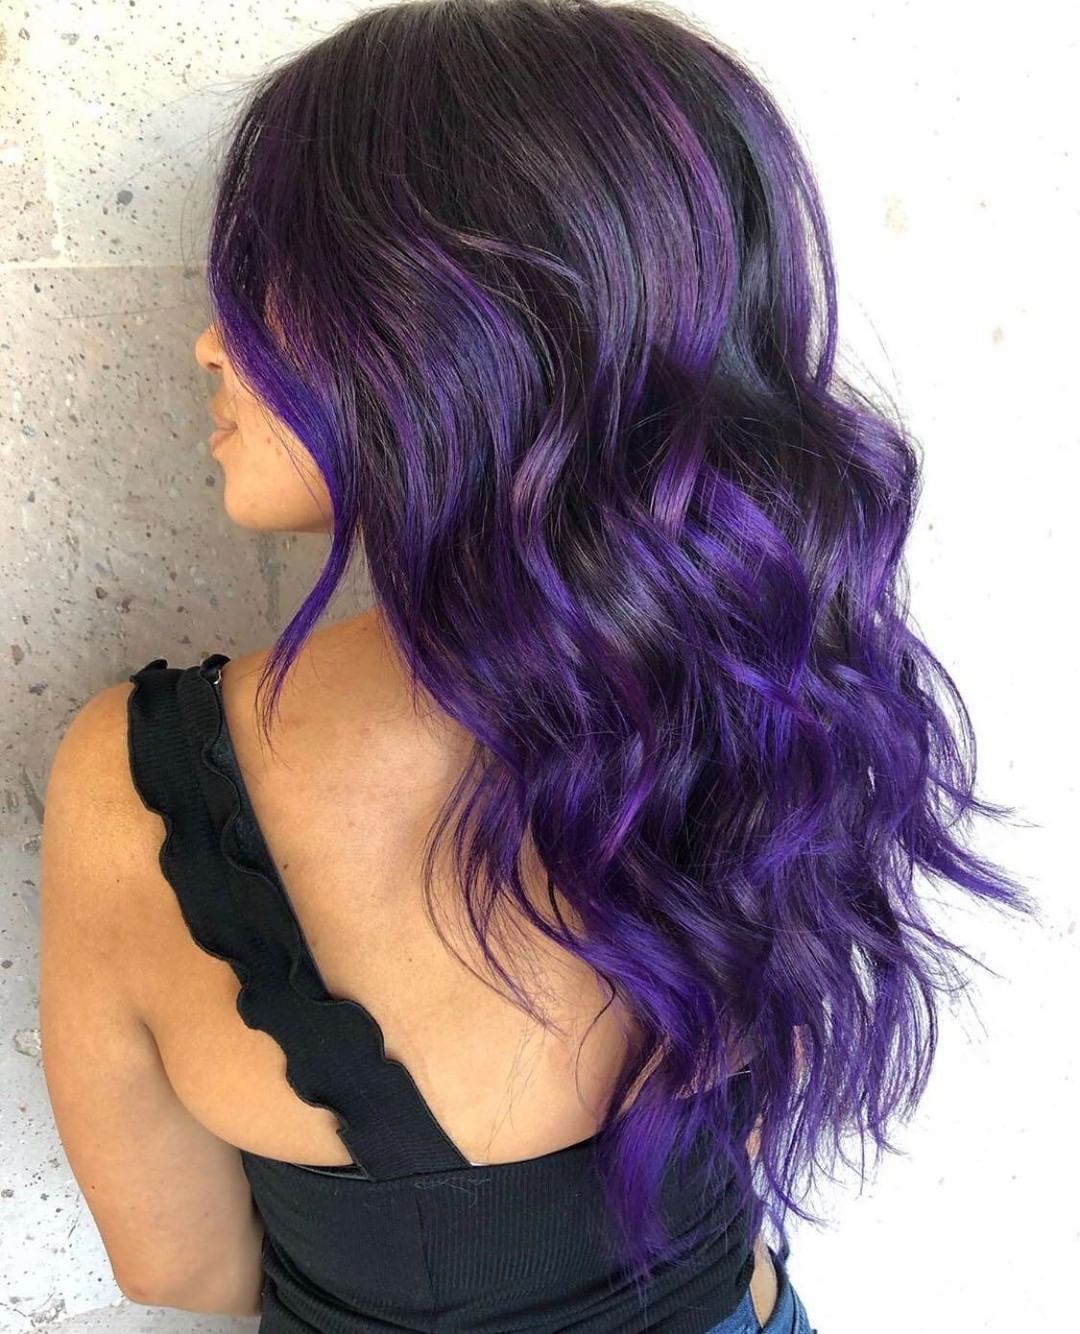 dimensional dark purple hairstyle with face-framing layers